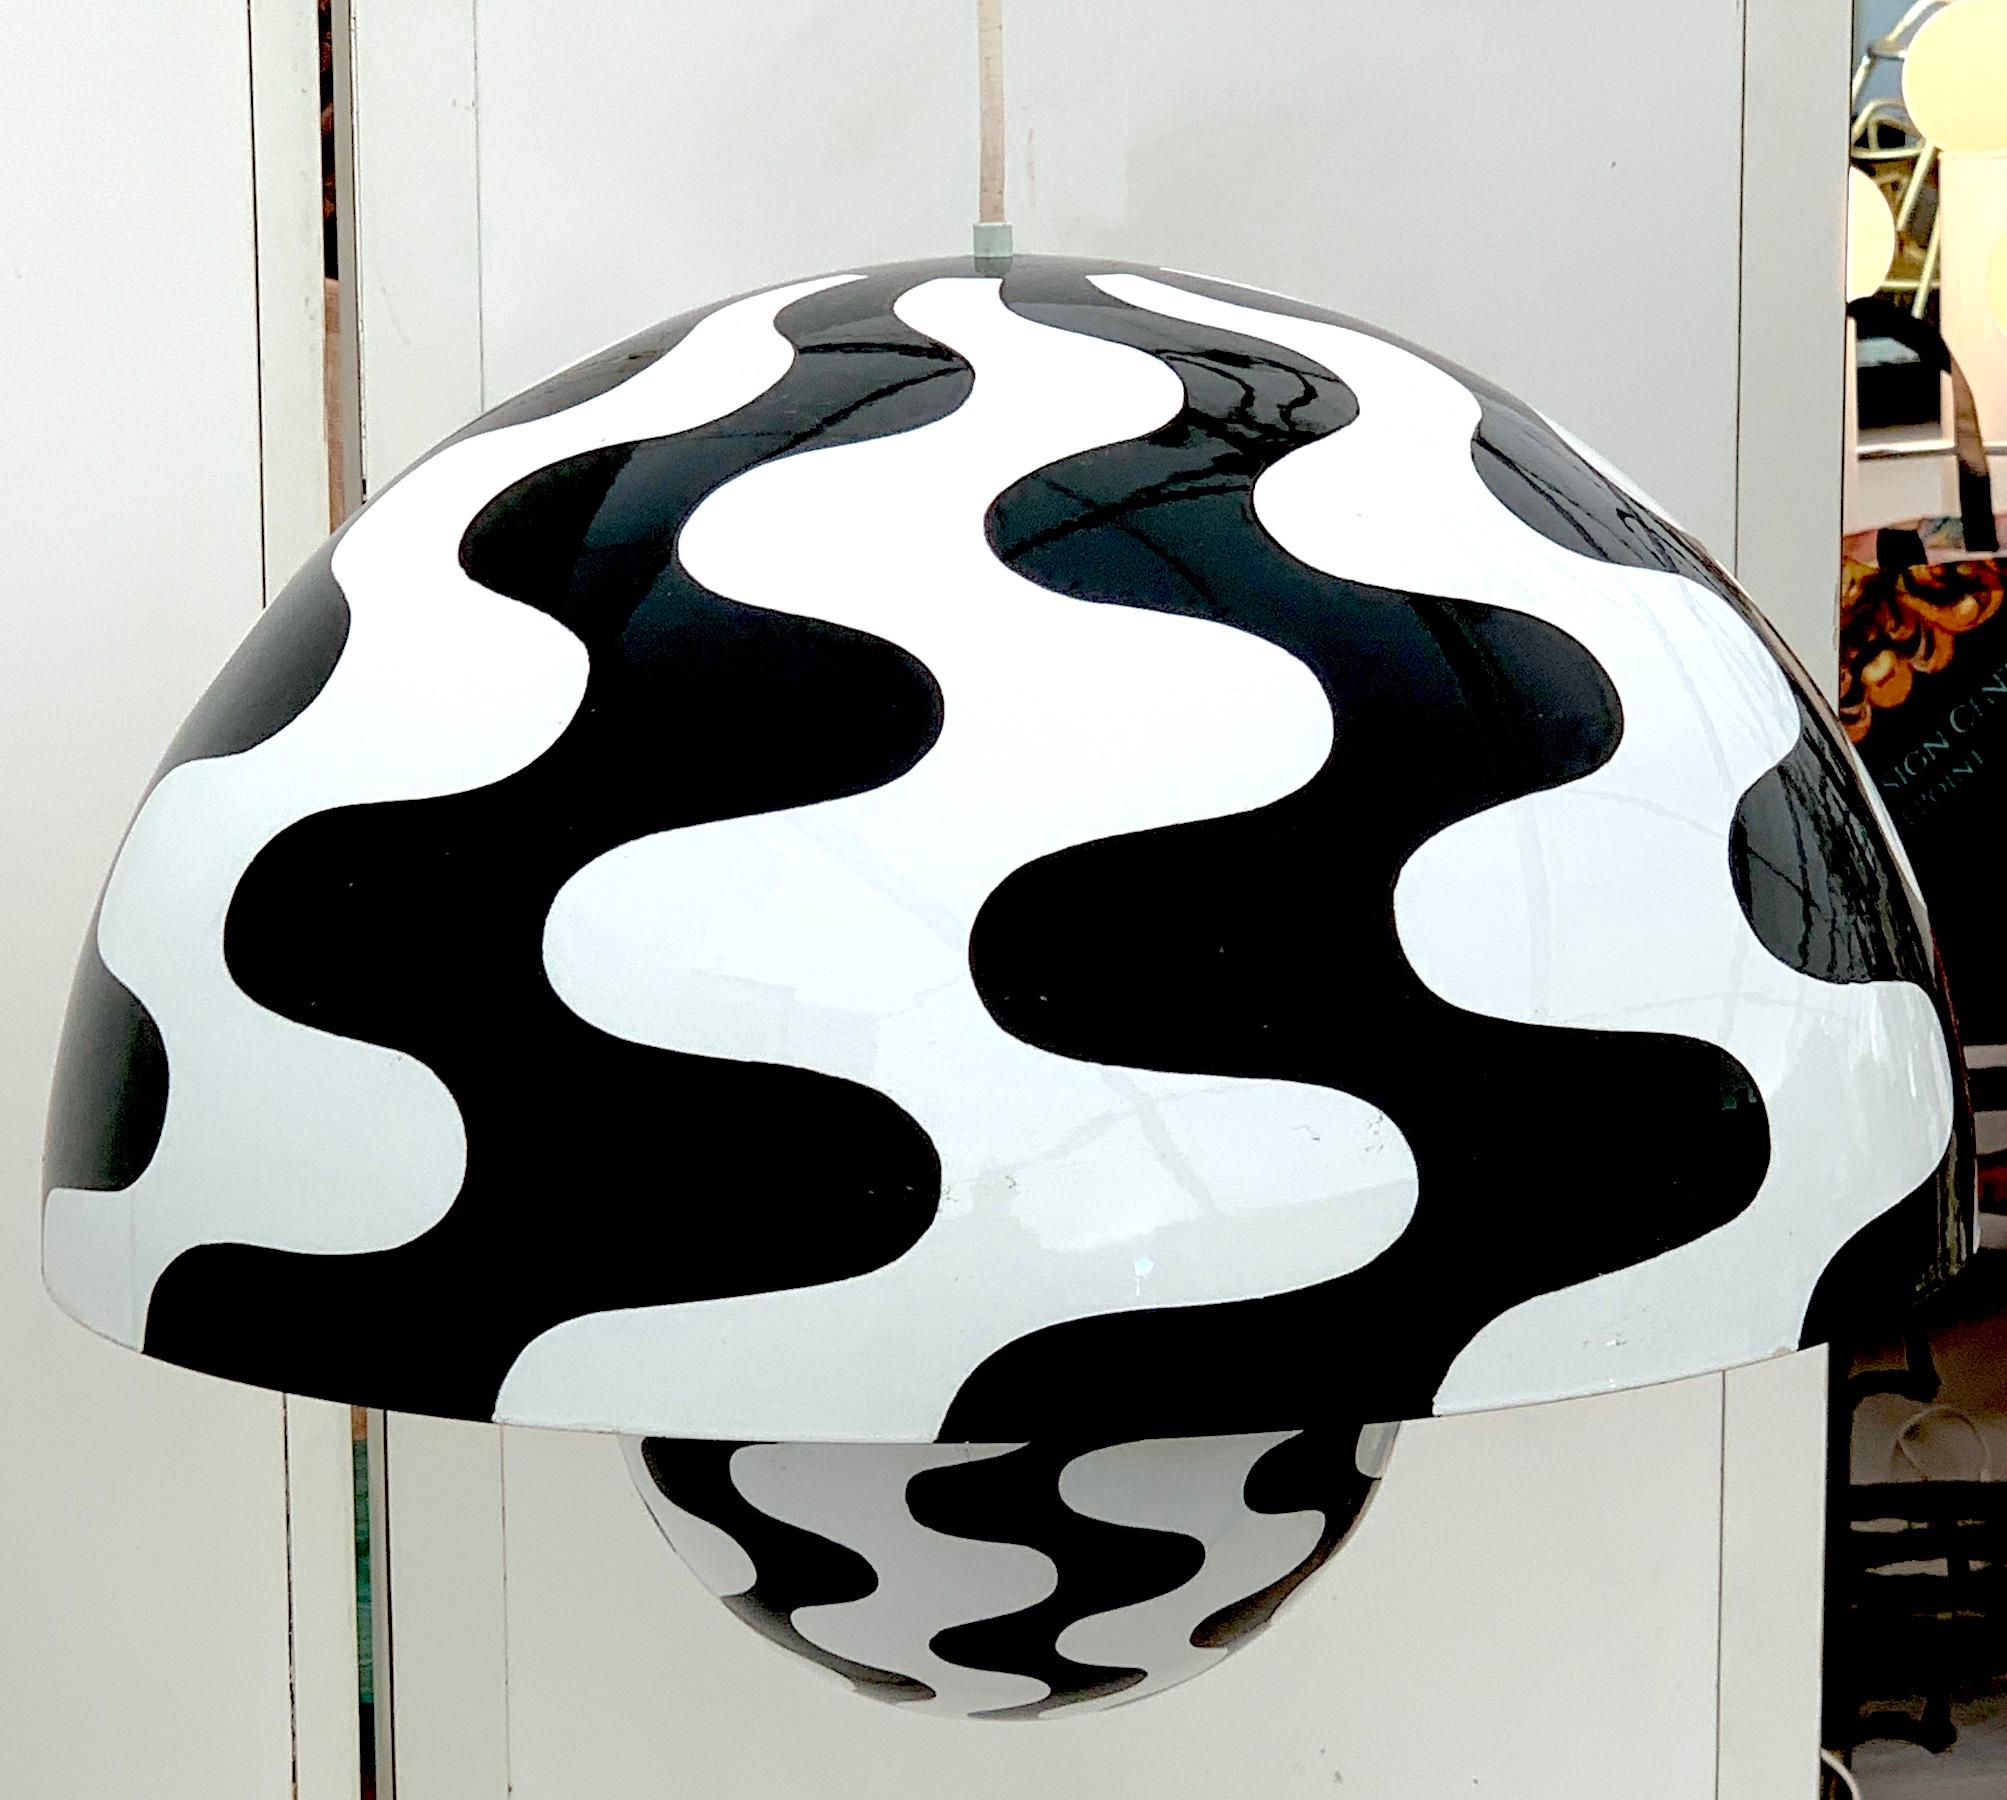 'Flower Pot' black and white hanging lamp by Verner Panton for Louis Poulsen, 1971
Enhance your interior space with this rare and iconic 'Flower Pot' hanging lamp by renowned designer Verner Panton for Louis Poulsen. This striking piece dates from